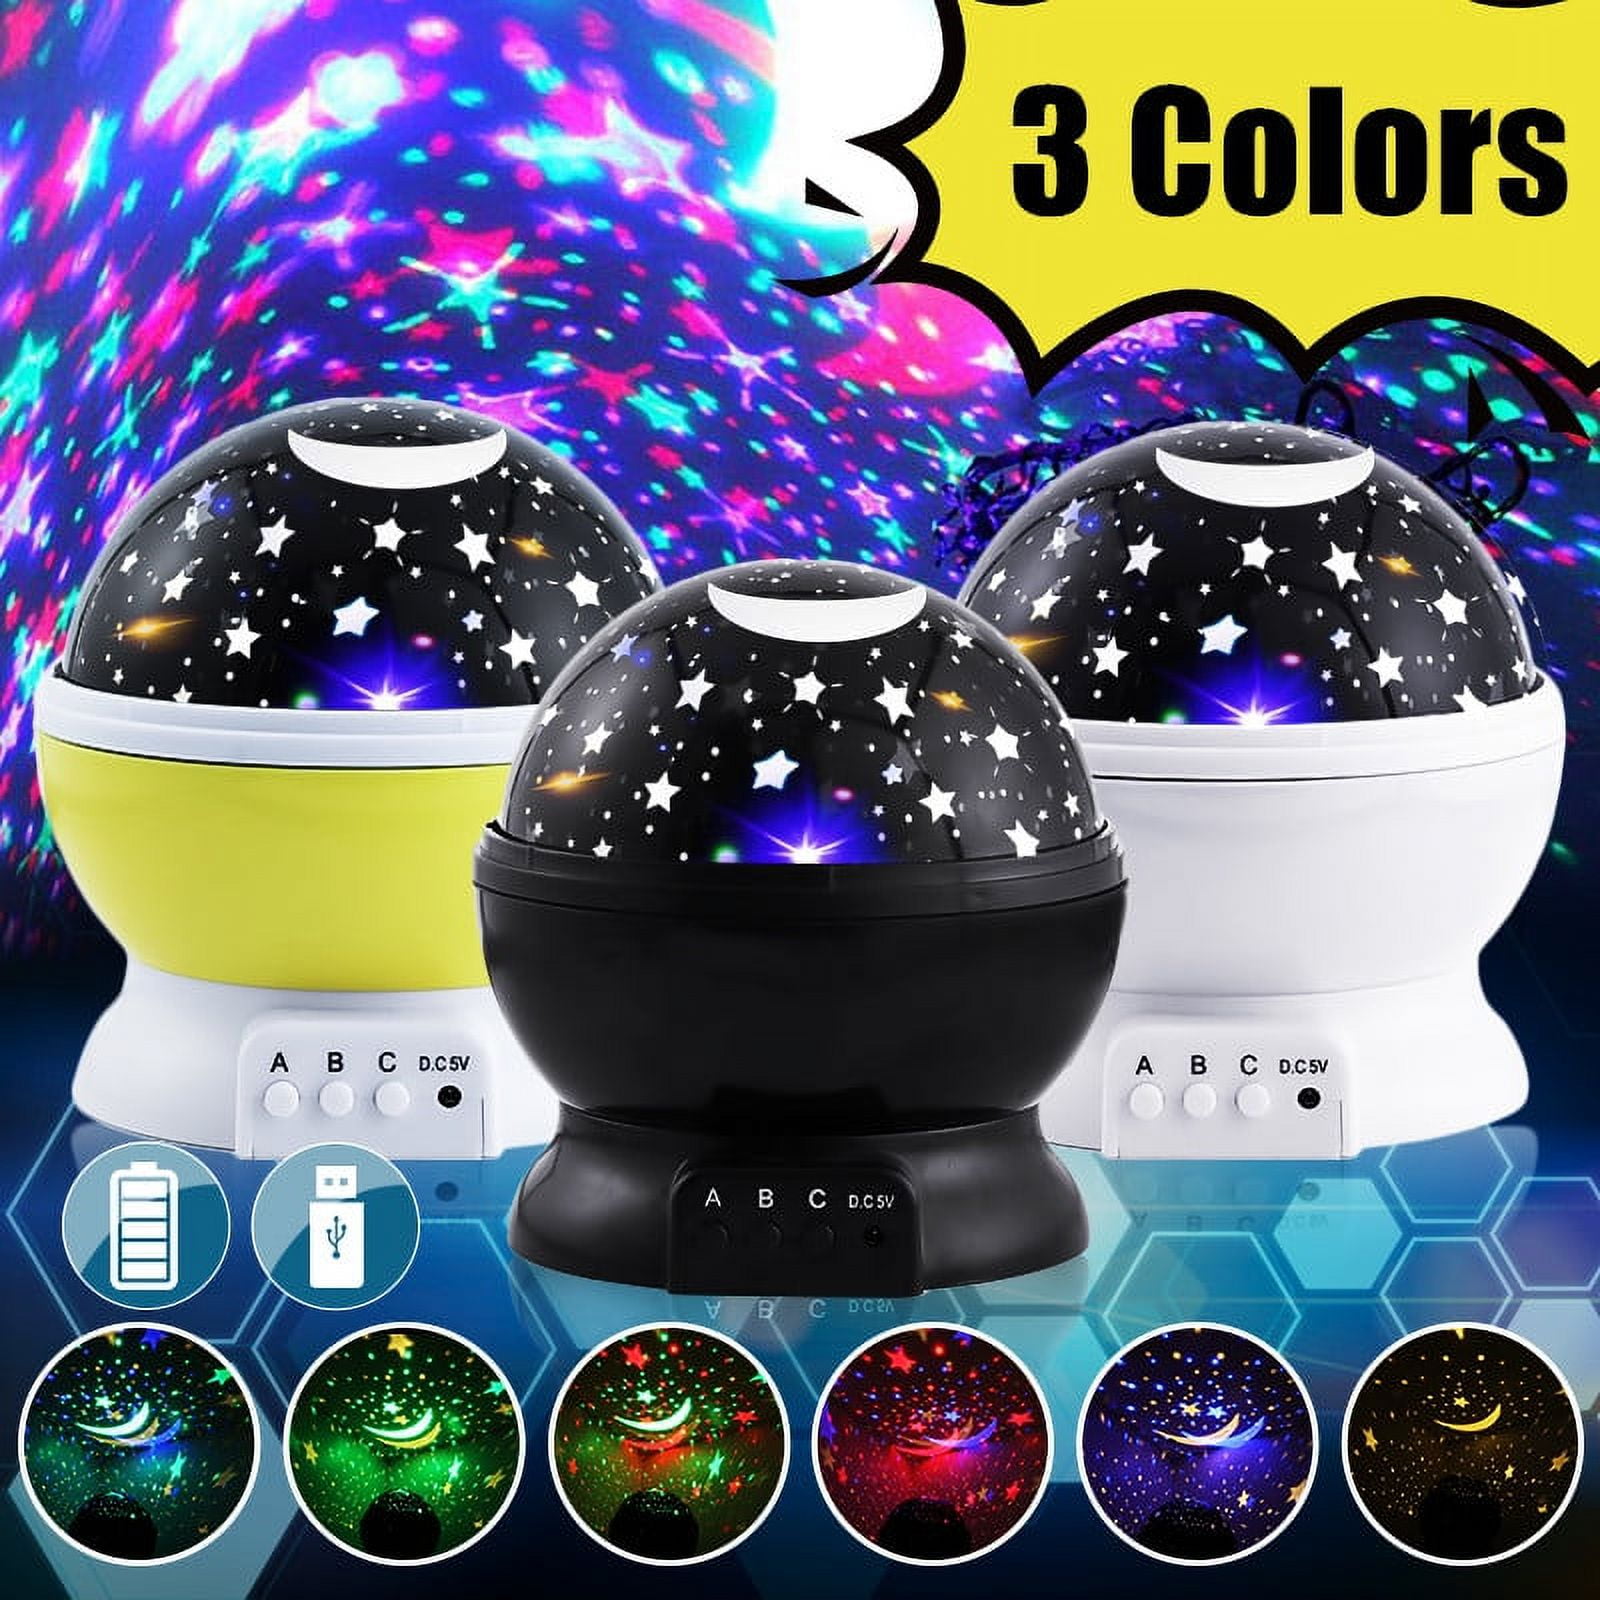 Star Projector Lamp Night Light 360 Degree Rotating Cosmos Star Projector, Starry  Moon Sky Night Projector Kids Bedroom Desk Lamp 4 LEDs 5 Colors Changing  with USB Cable, for Birthady Gift Christ 